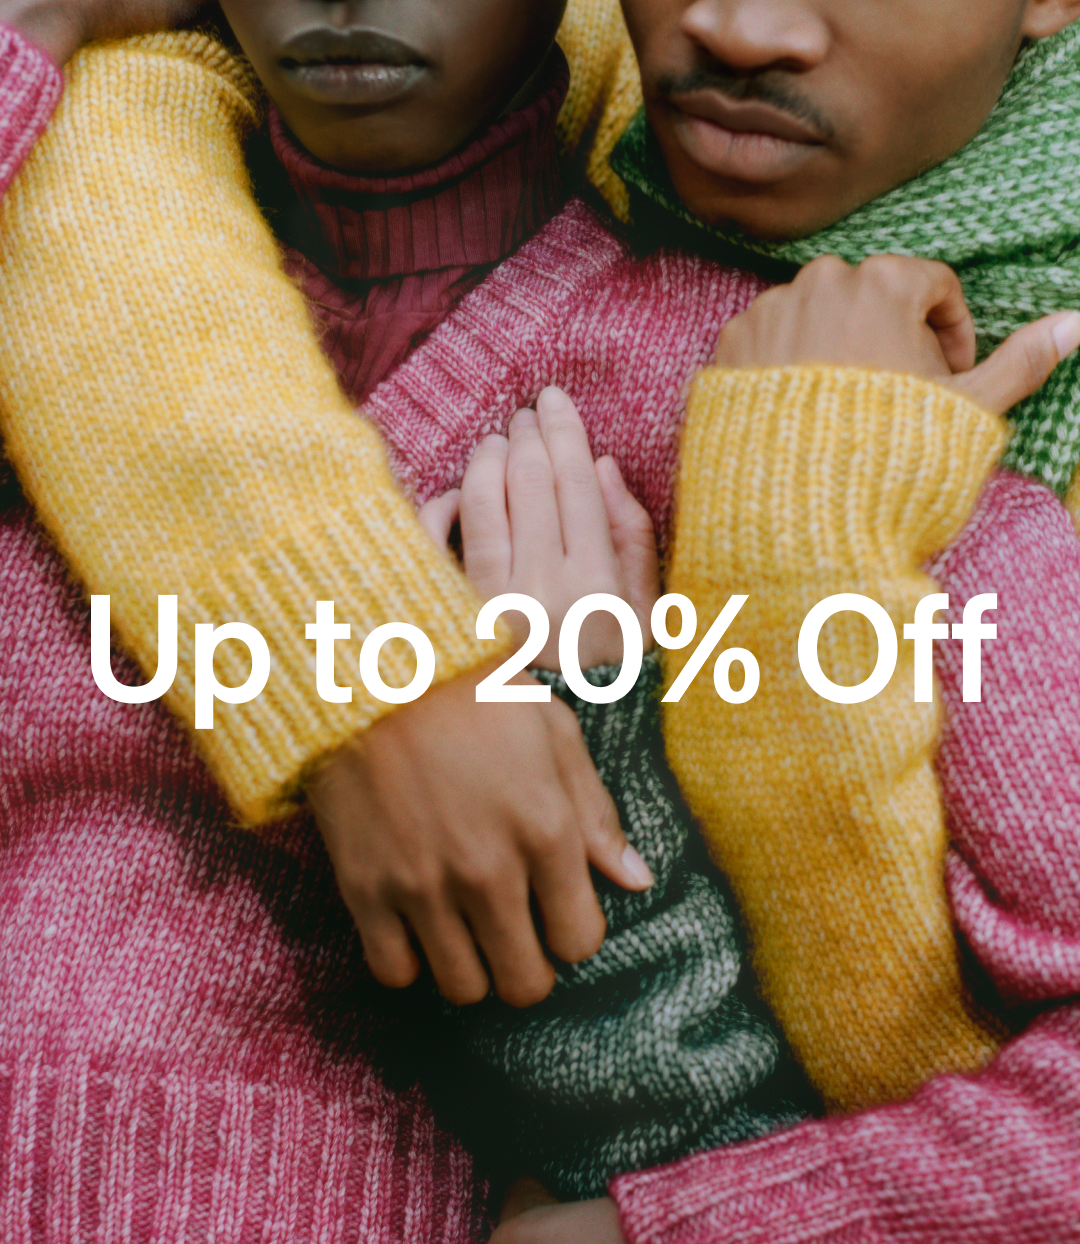 Up to 20% Off